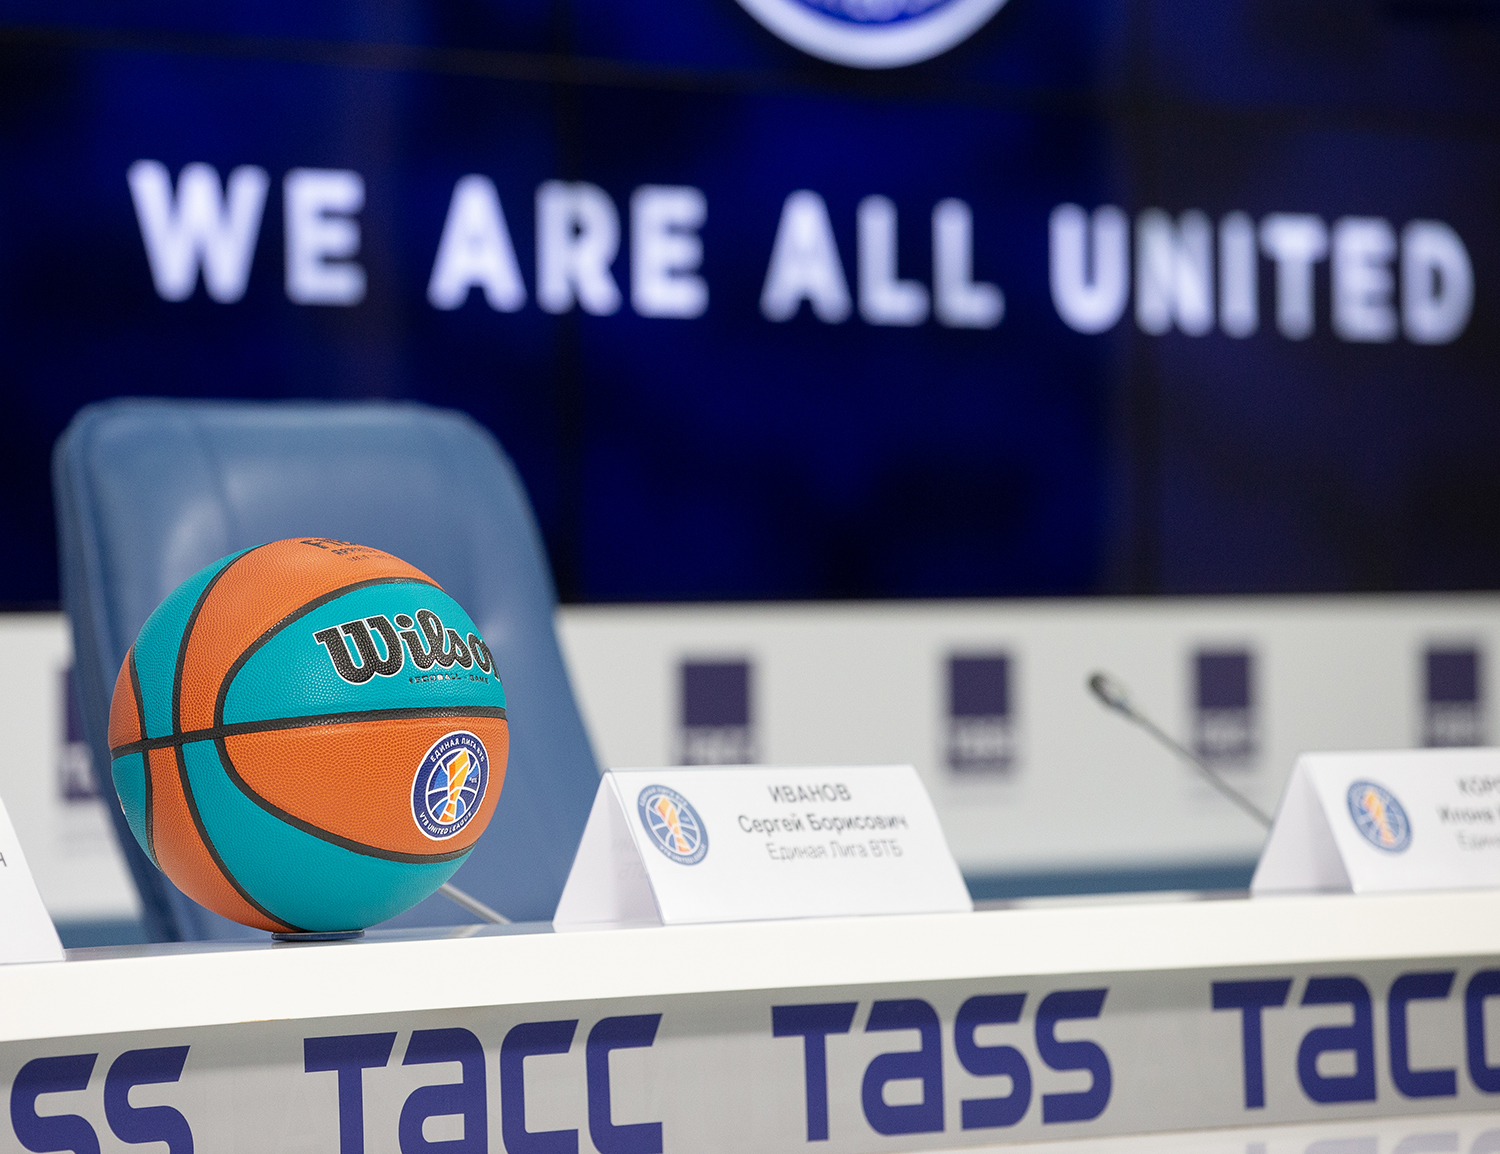 Board of the VTB United League meeting to be held on July 12 in TASS